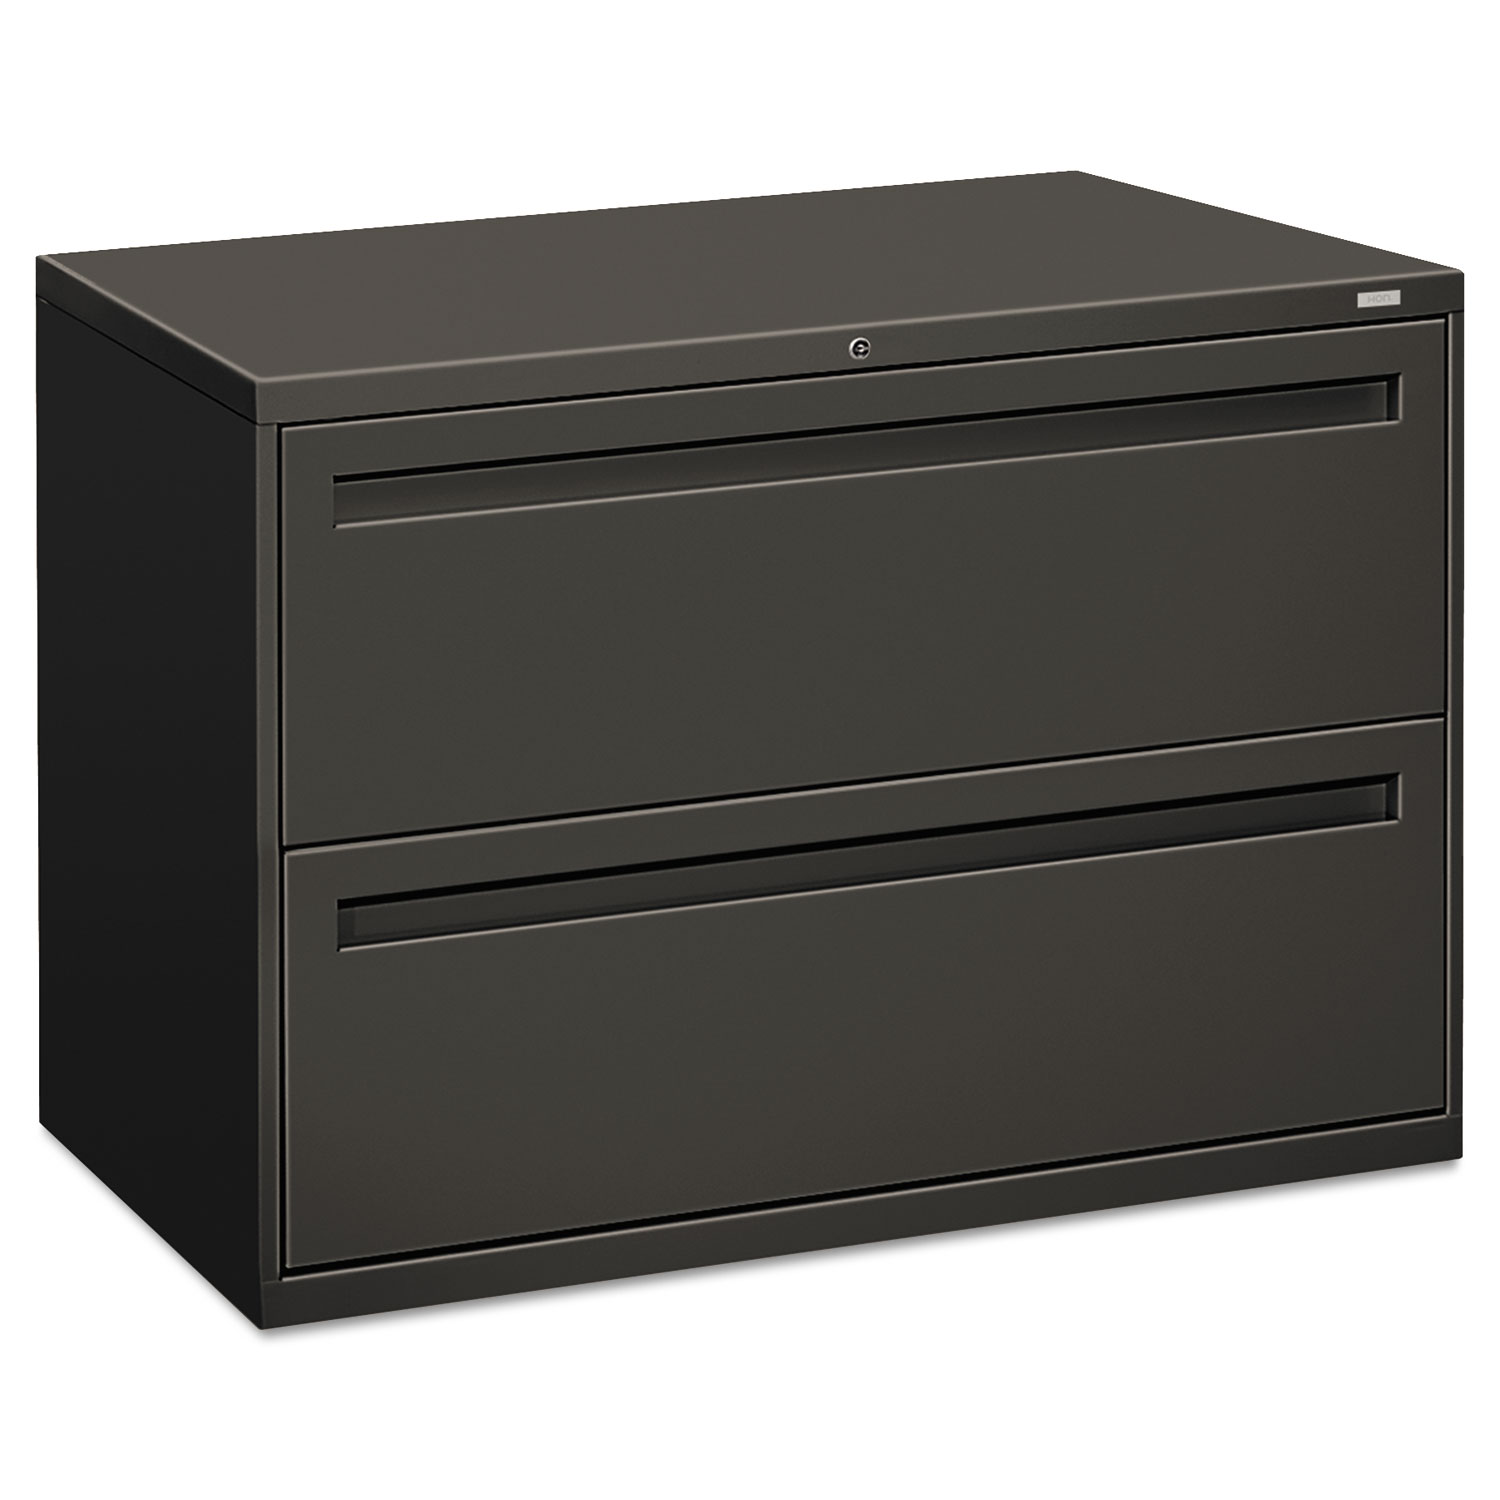  HON H792.L.S 700 Series Two-Drawer Lateral File, 42w x 18d x 28h, Charcoal (HON792LS) 